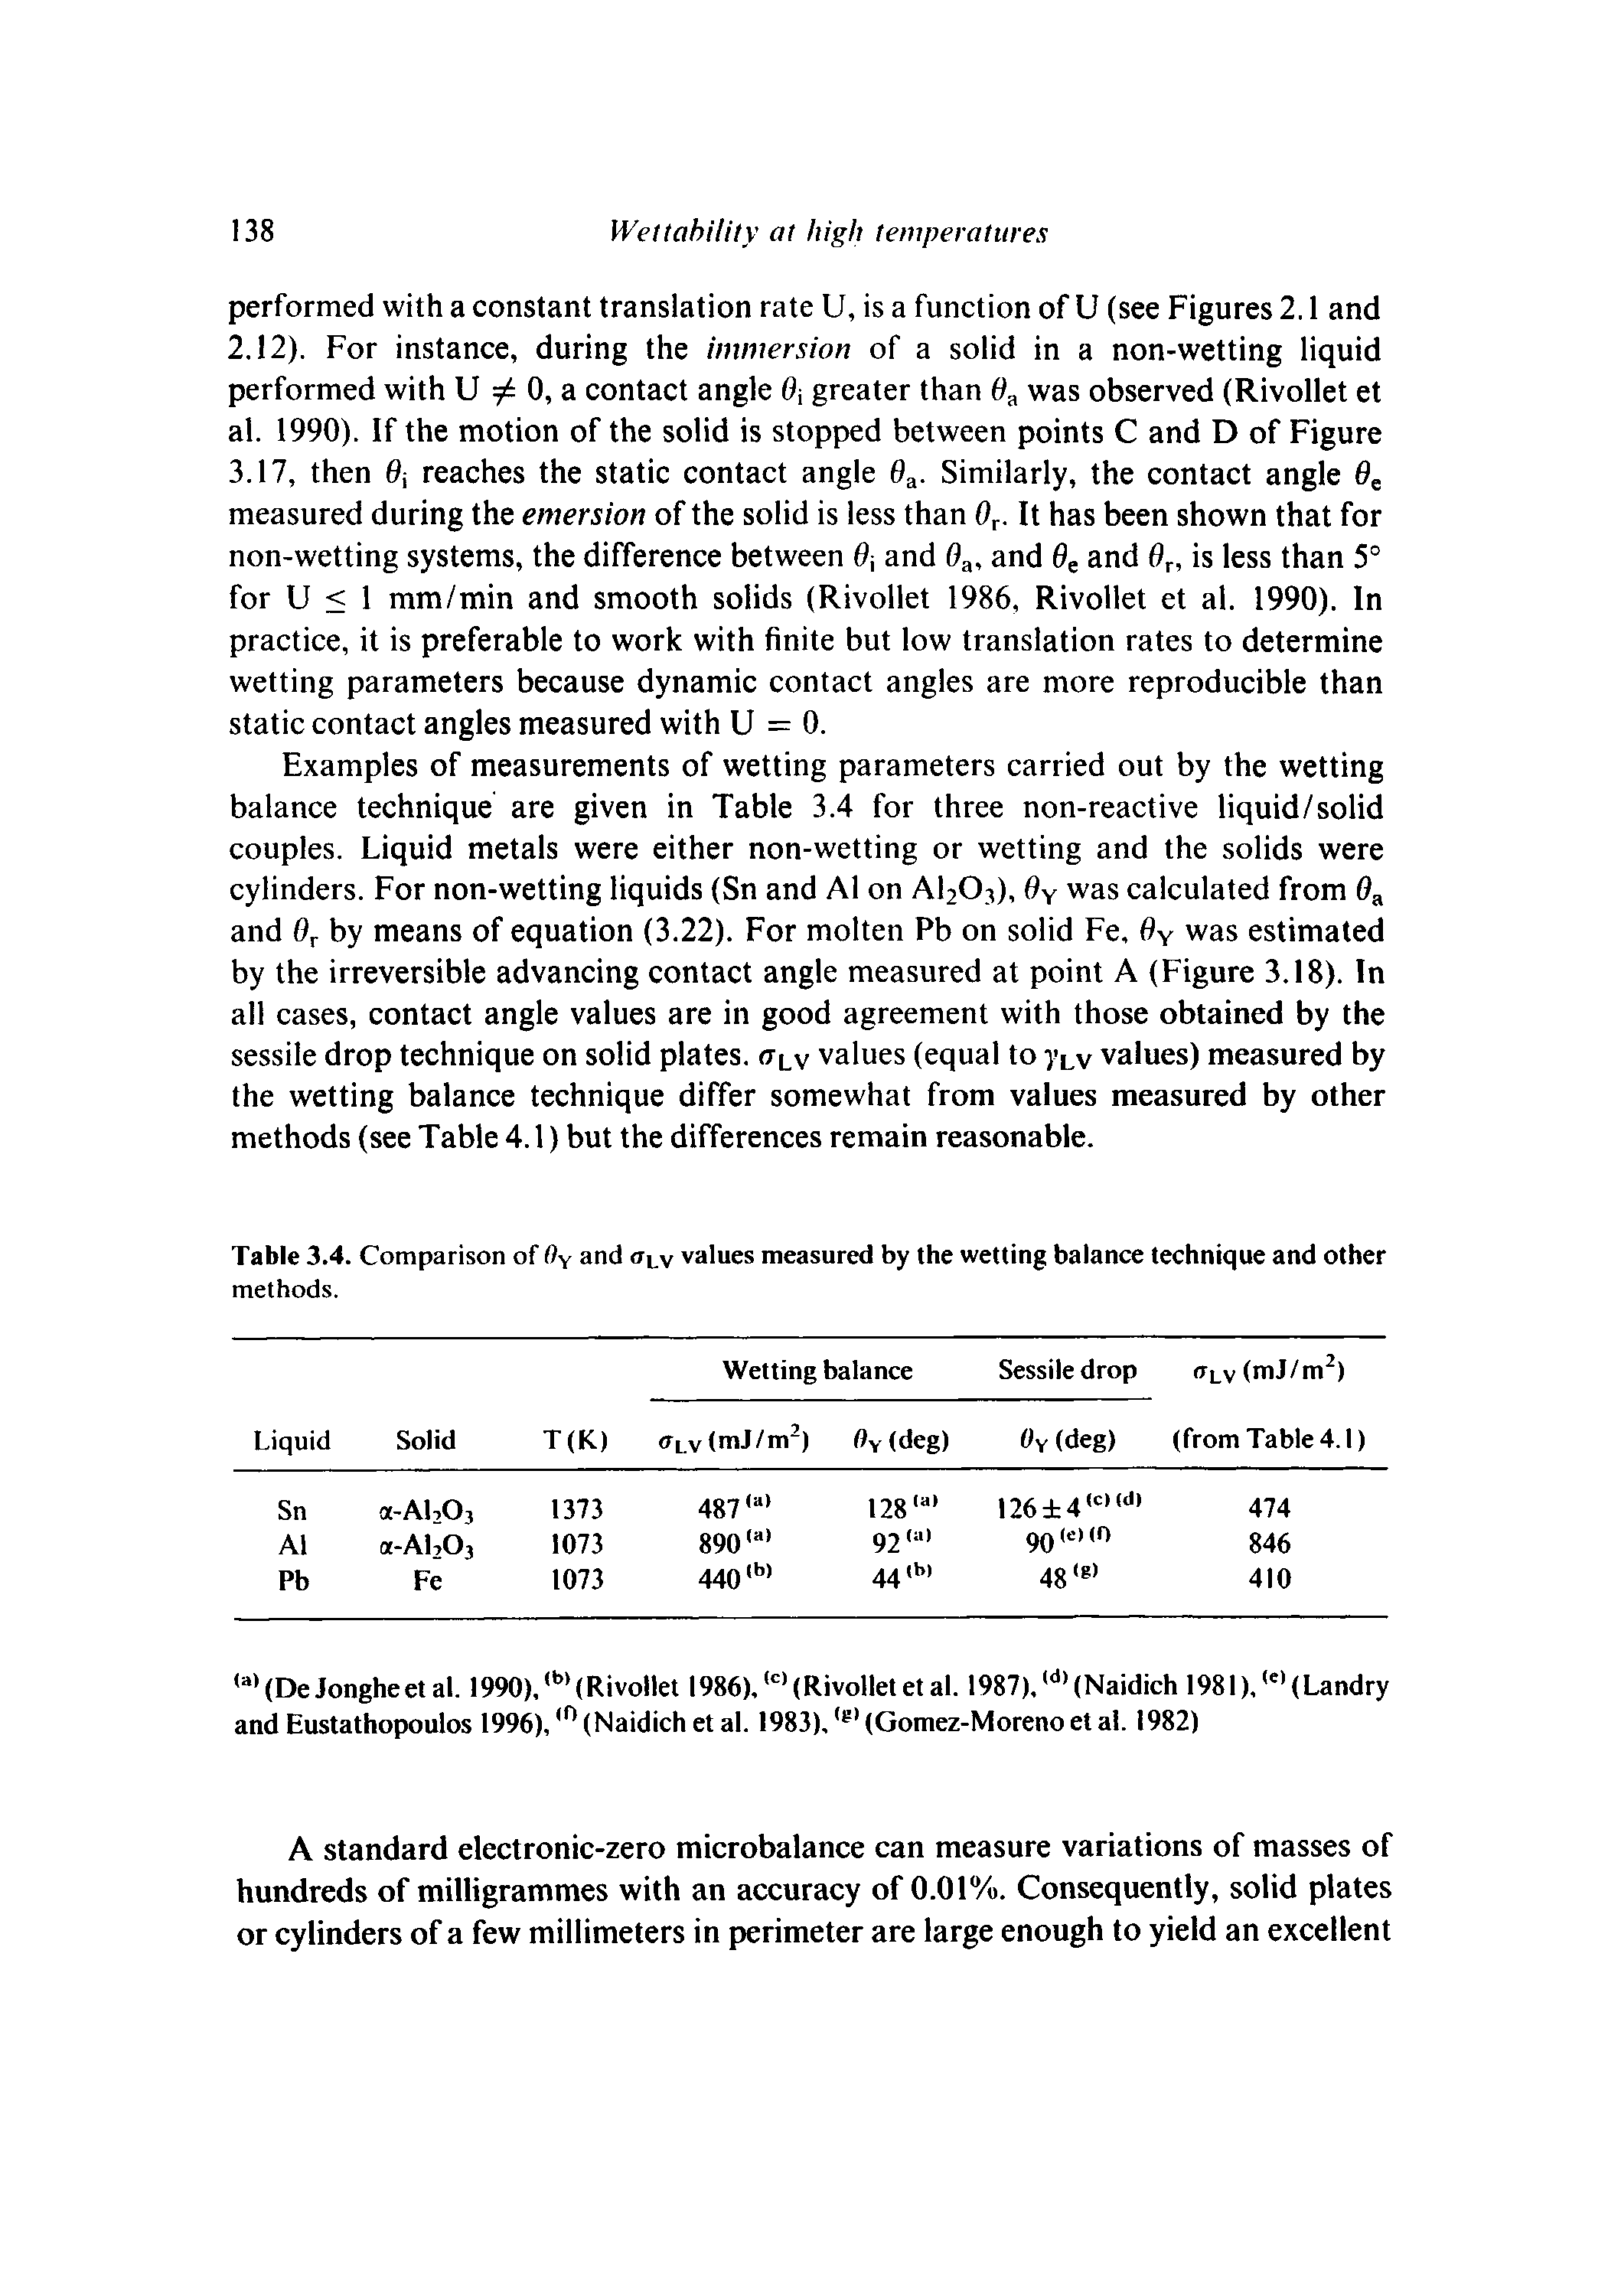 Table 3.4. Comparison of 0Y and <rLV values measured by the wetting balance technique and other...